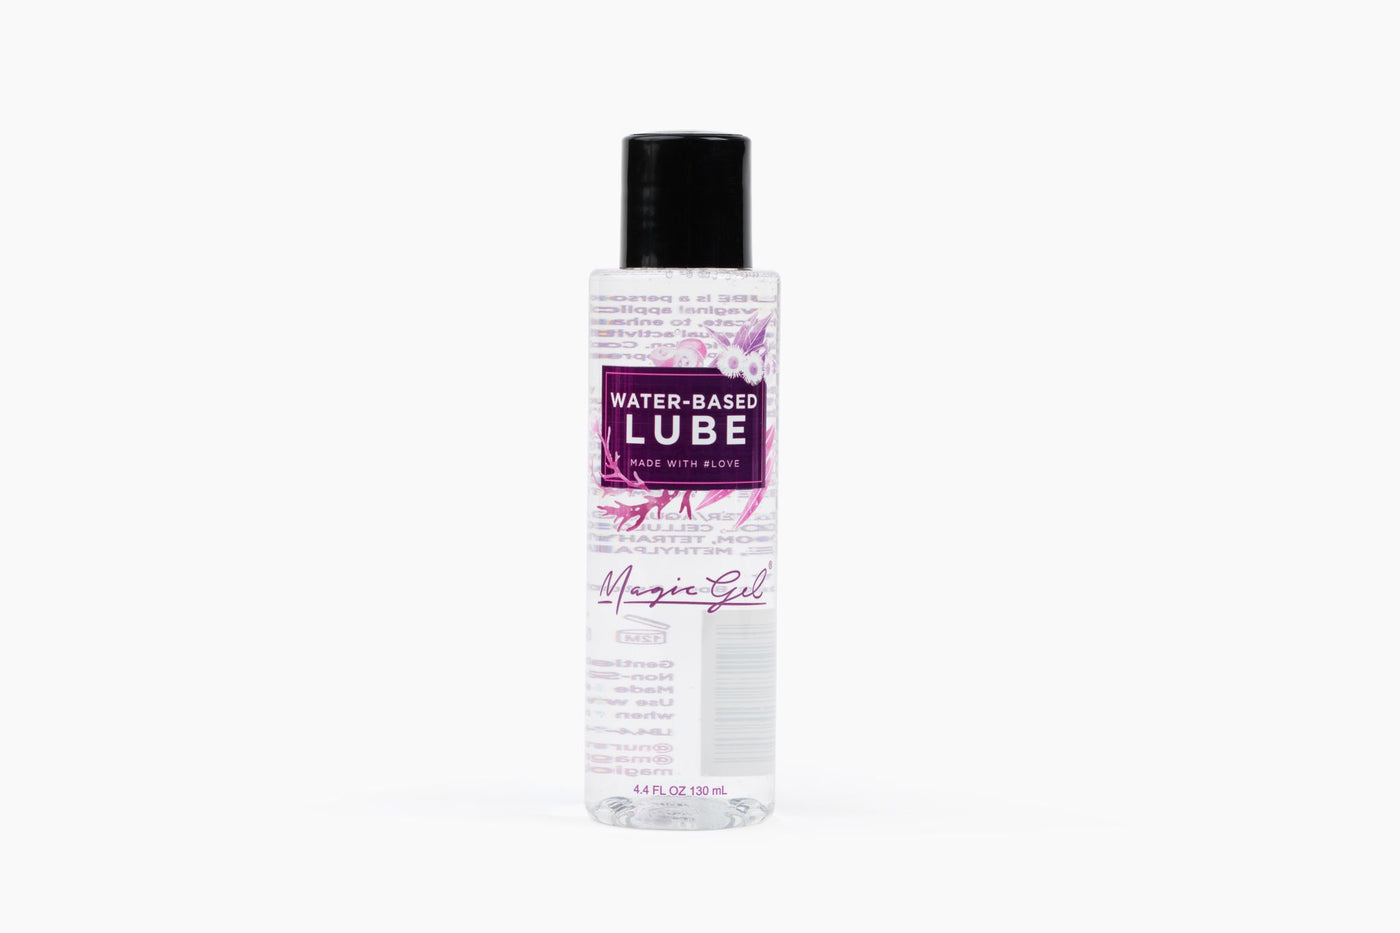 Lube Life Water-Based Personal Lubricant Lube for Men Women